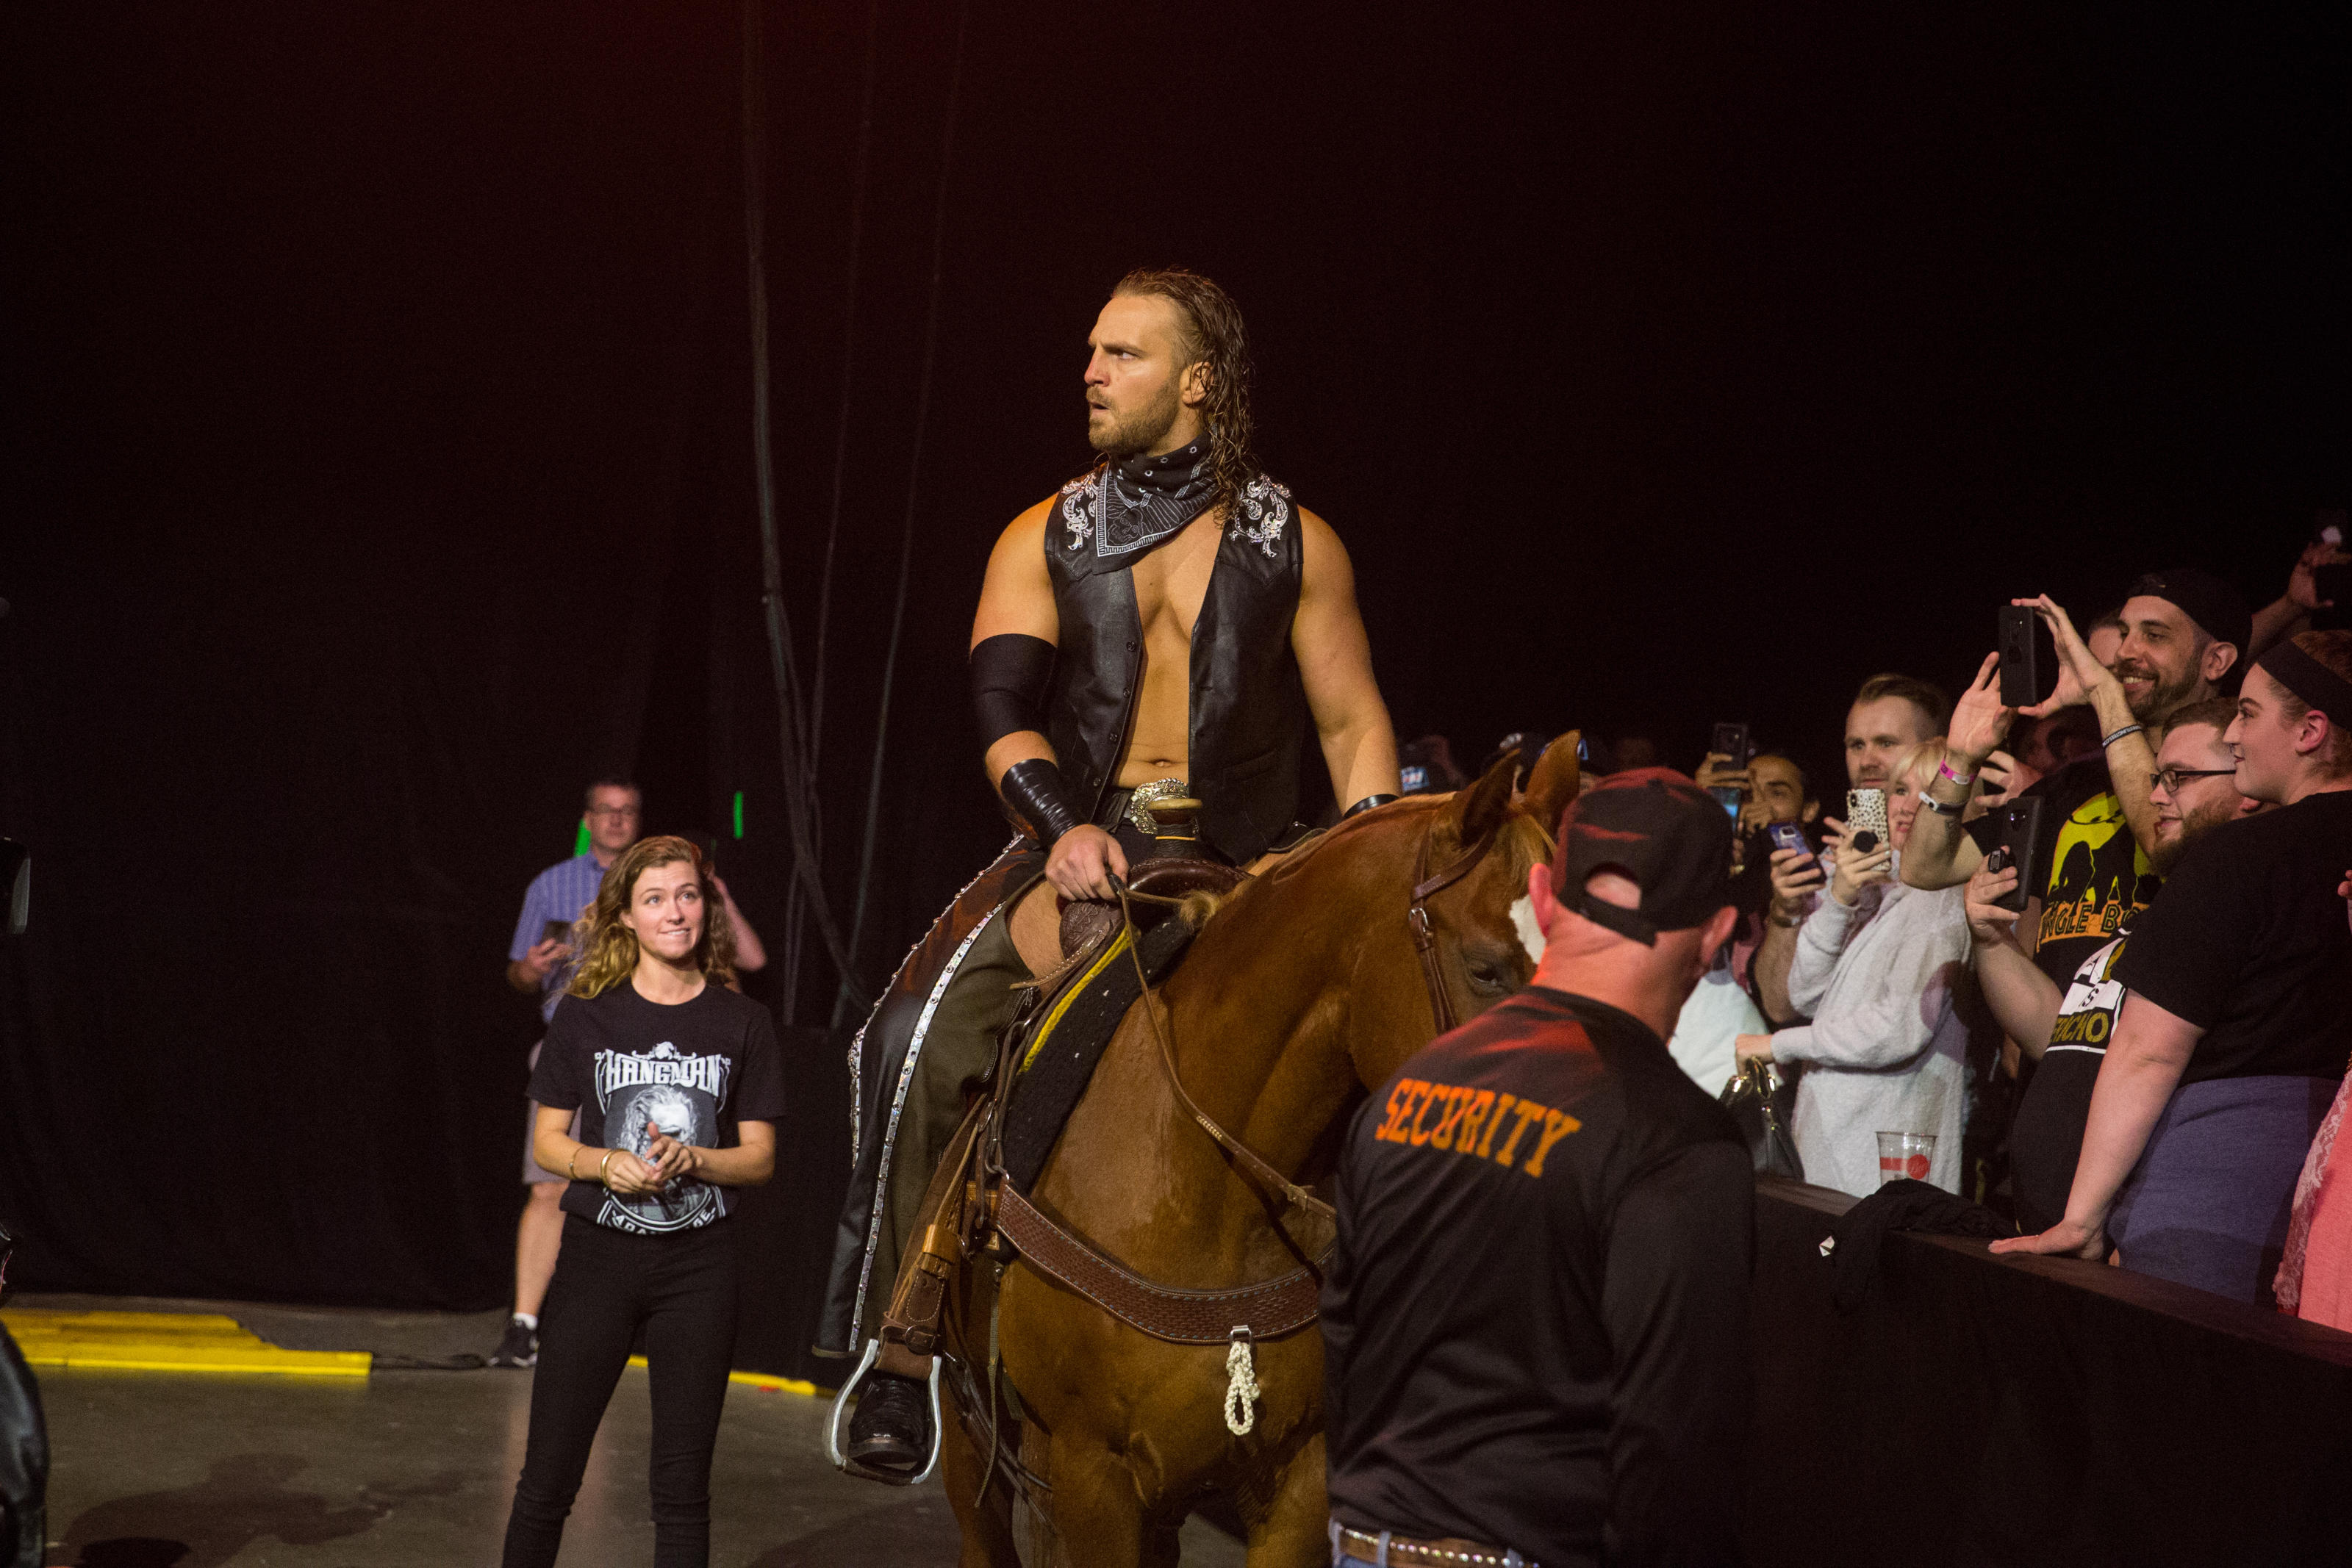 AEW Full Gear 2021 Results: Adam Page Beats Kenny Omega, Wins World Title